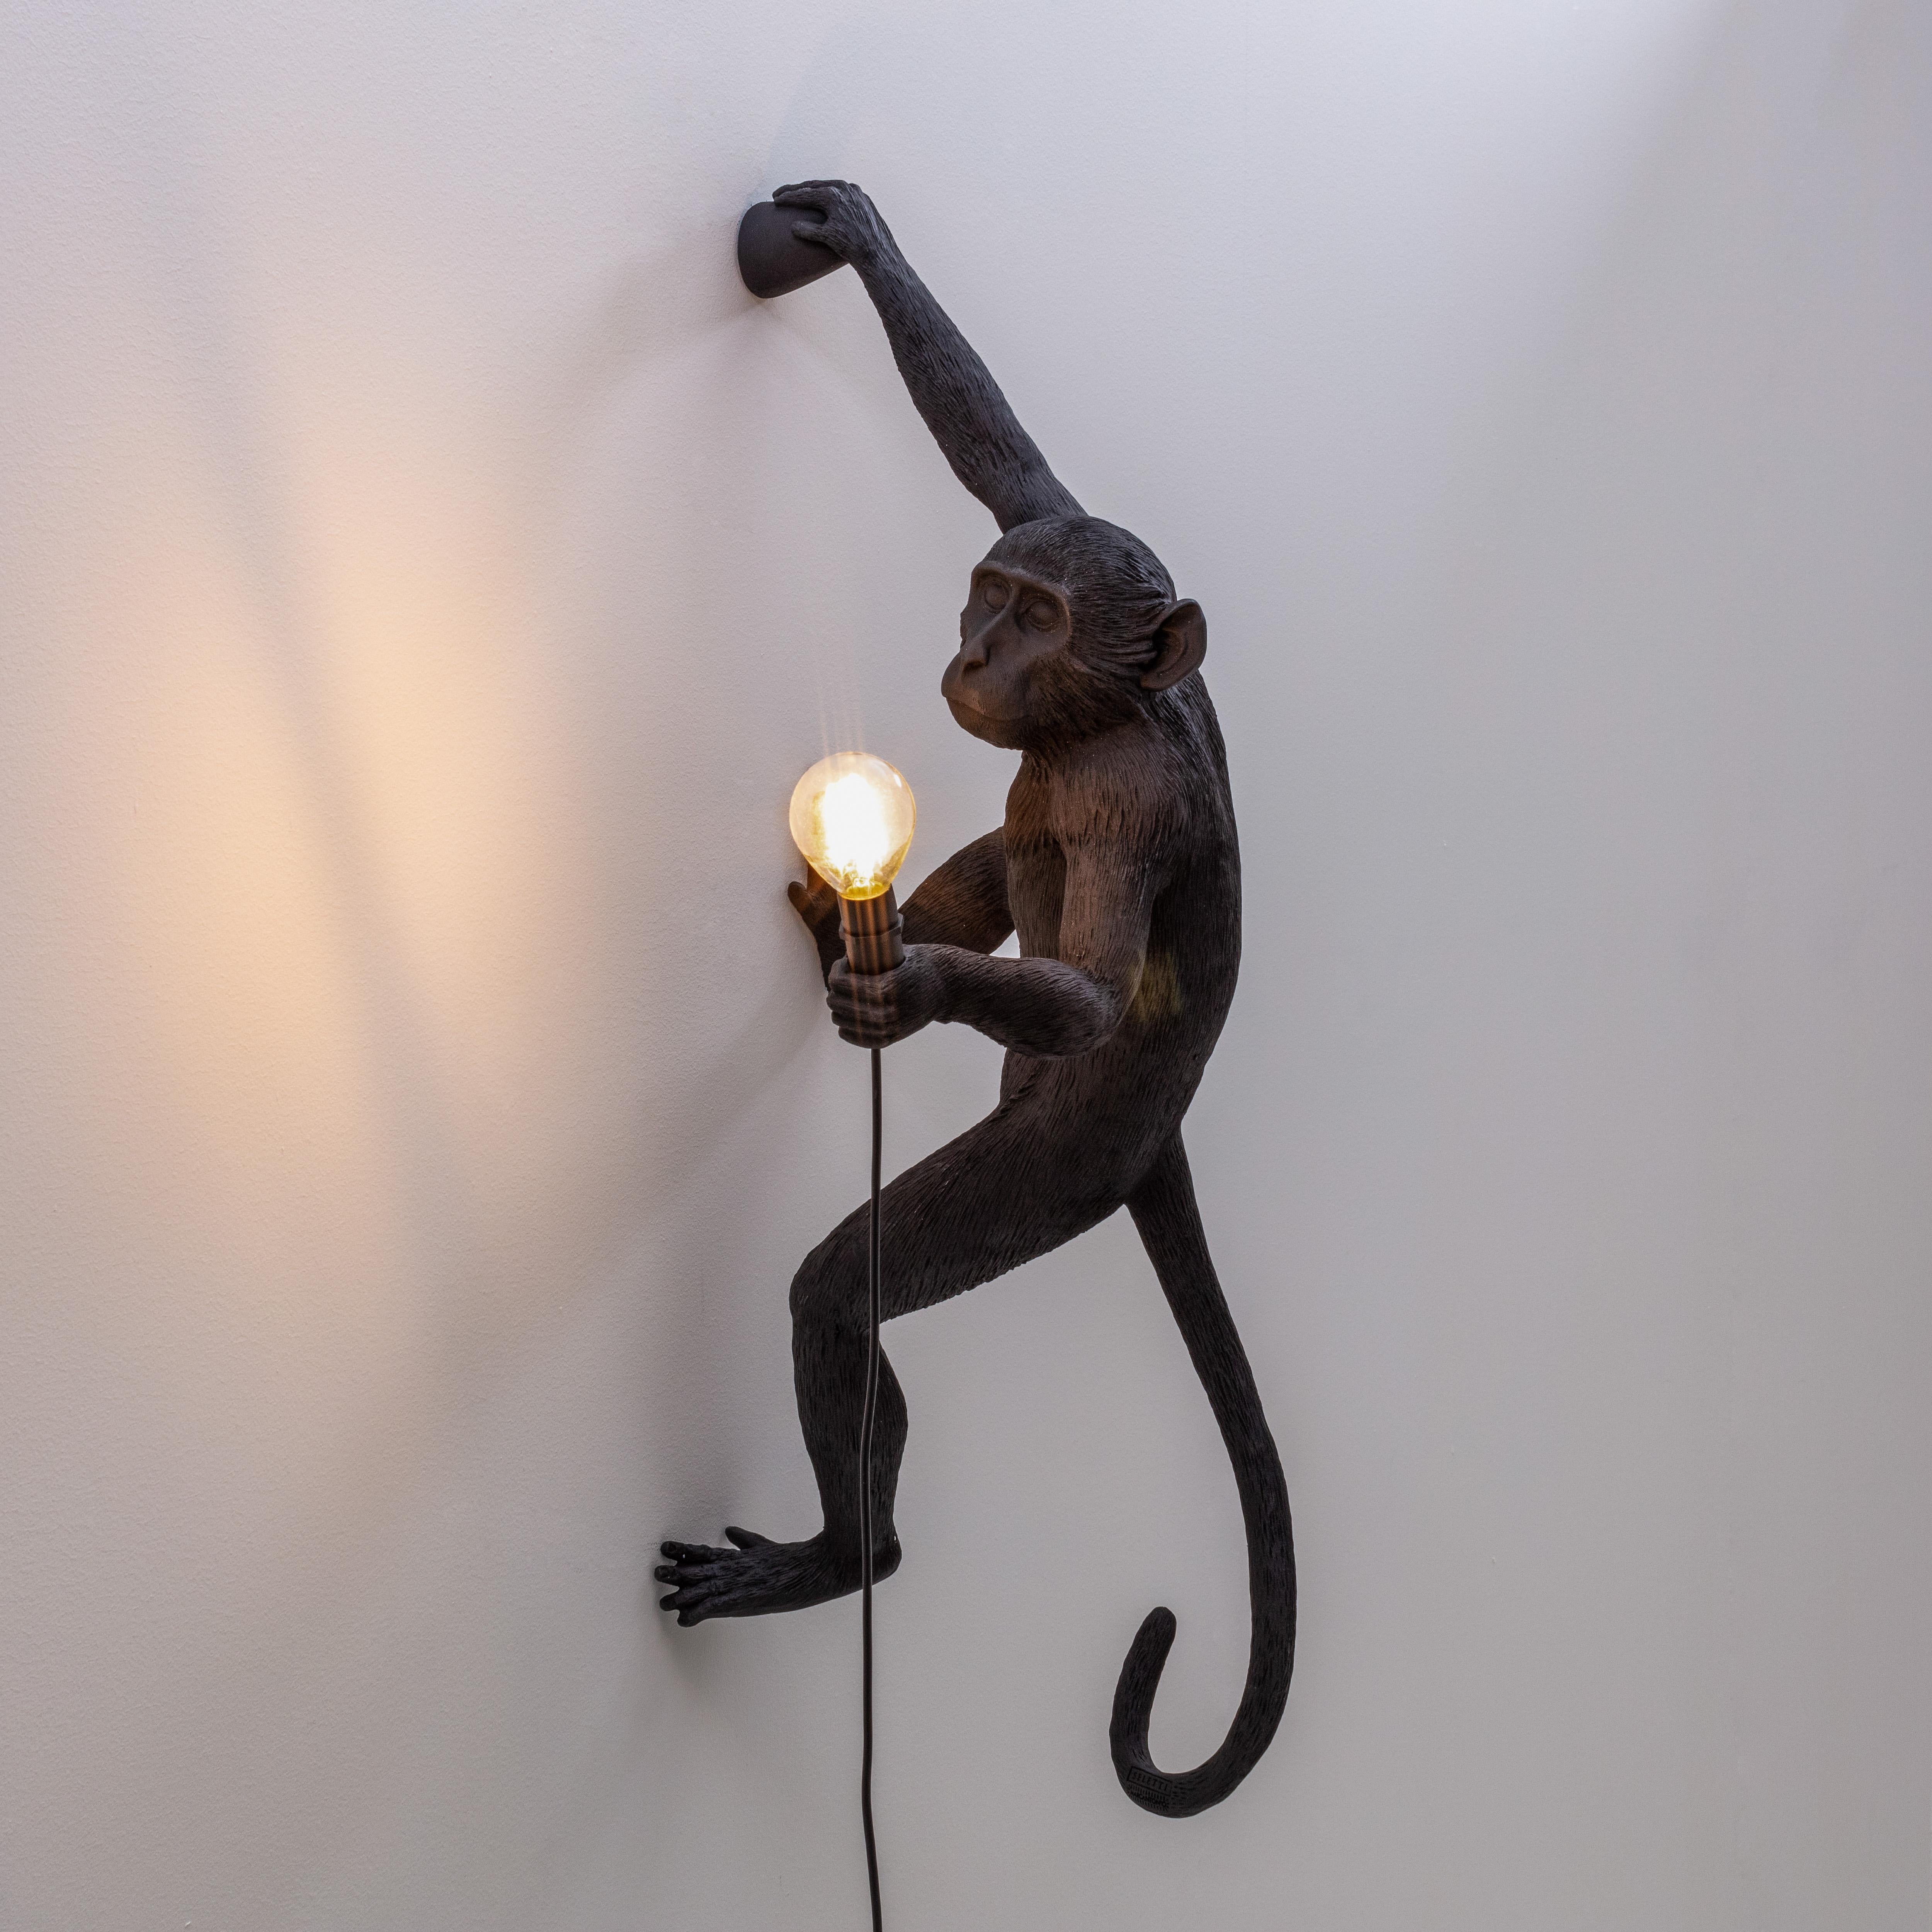 A mischievous monkey stole your light and now it’s up to you to get it back. This black resin lamp designed by Marcantonio makes you feel just like in a safari, lost in the deep black Africa.

- Hanging lamp
- Design: Marcantonio
- Material: Resin
-